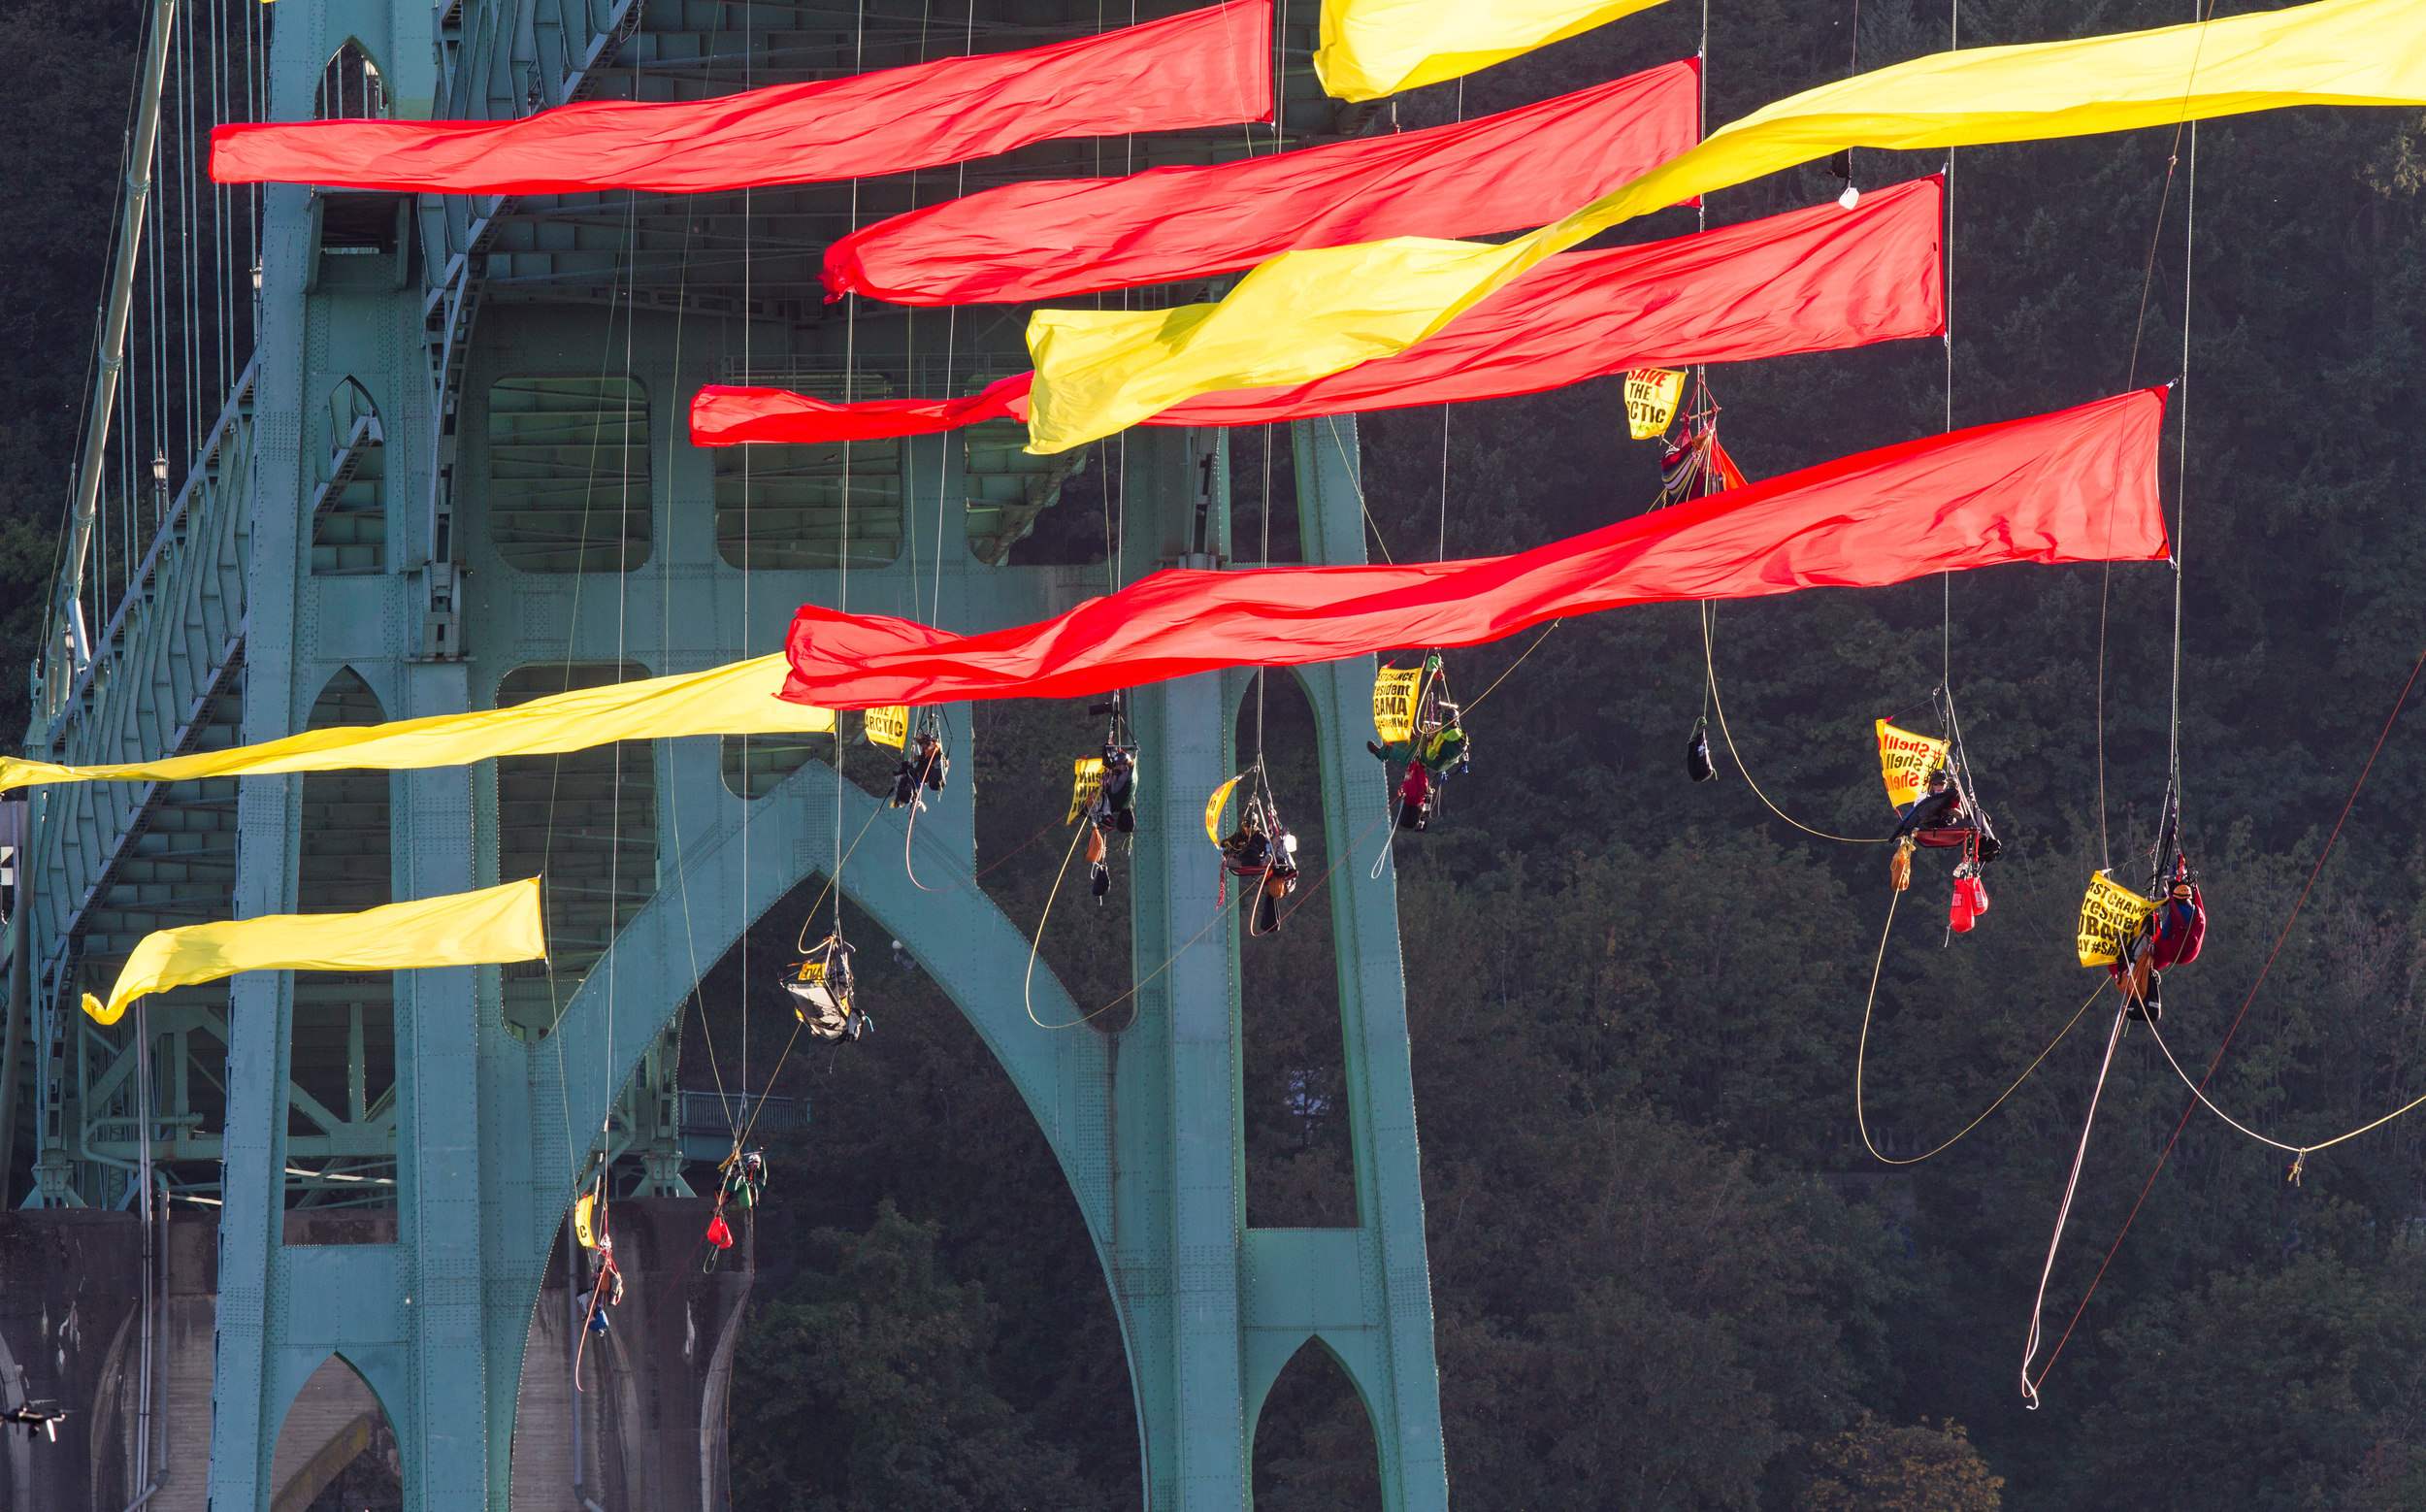 Colorful streamers float on the wind under a bridge where climbers have suspended themselves.